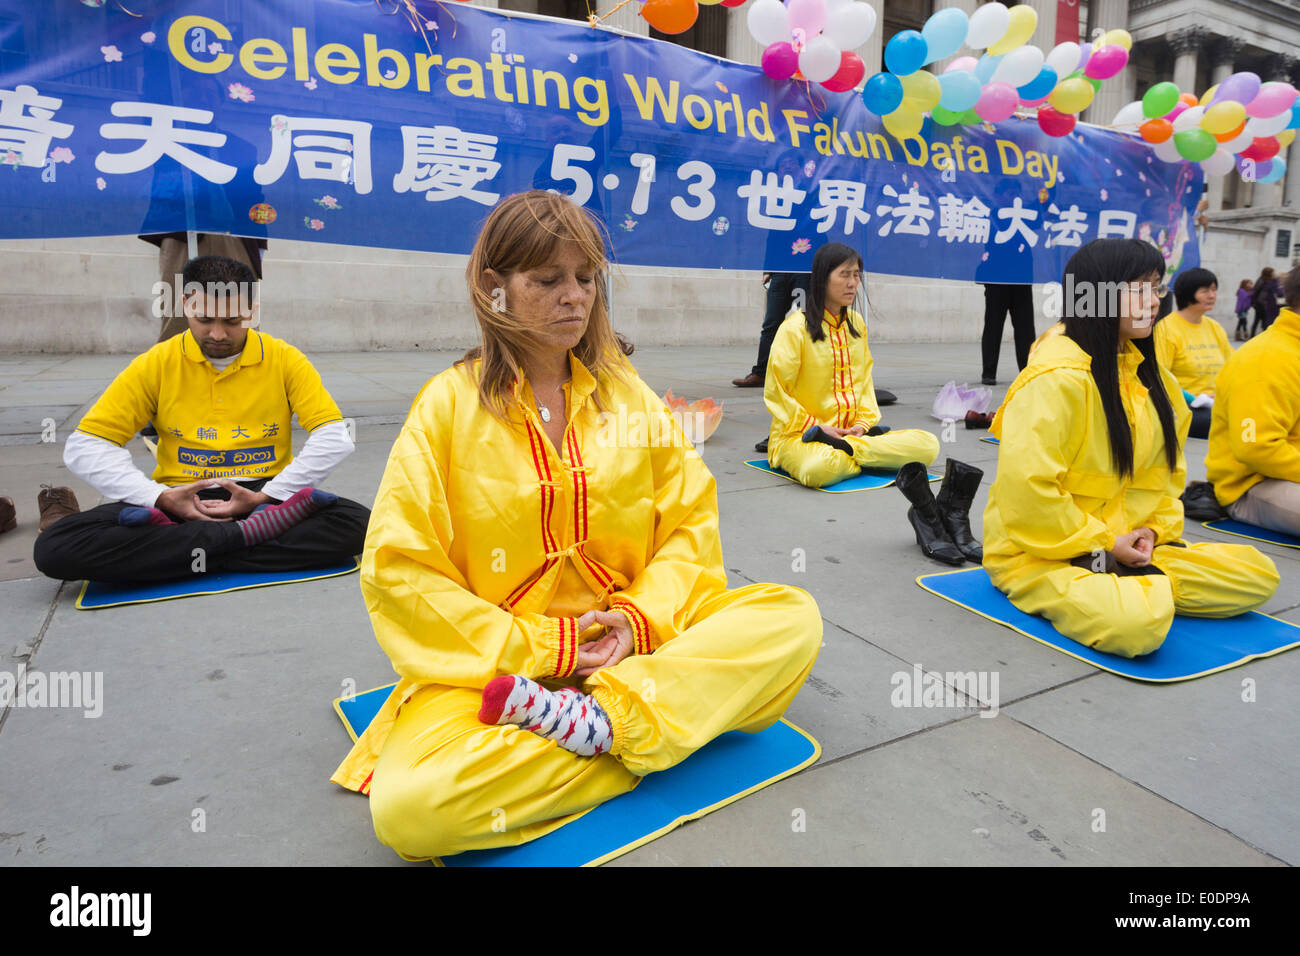 London, UK. 10 May 2014. Falun Dafa/Falun Gong Practitioners celebrate World Falun Dafa Day in London's Trafalgar Square. Falun Dafa is a different name for Falun Gong. Falun Gong is a traditional practive to improve body and mind and it was made public in China in 1992. Due to its popularity it was prohibited in 1999 and its members have since been persecuted and been subject to human rights abuse. The celebration is also a protest to raise awareness. Credit:  Nick Savage/Alamy Live News Stock Photo